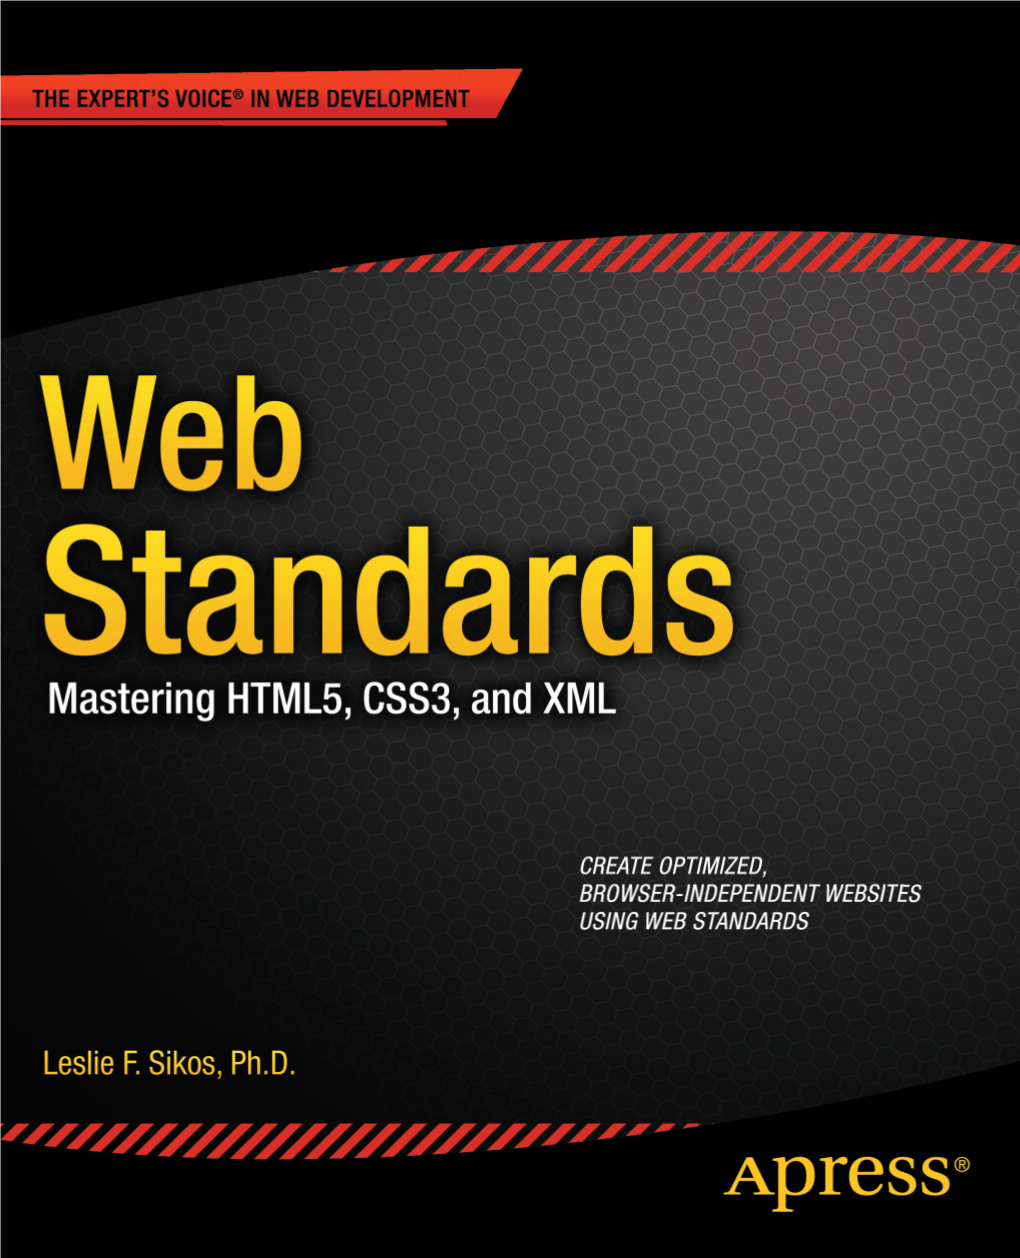 Web Standards Web Standards: Mastering HTML5, CSS3, and XML Gives You a Deep Understand- Ing of How Web Standards Can Be Applied to Improve Your Website